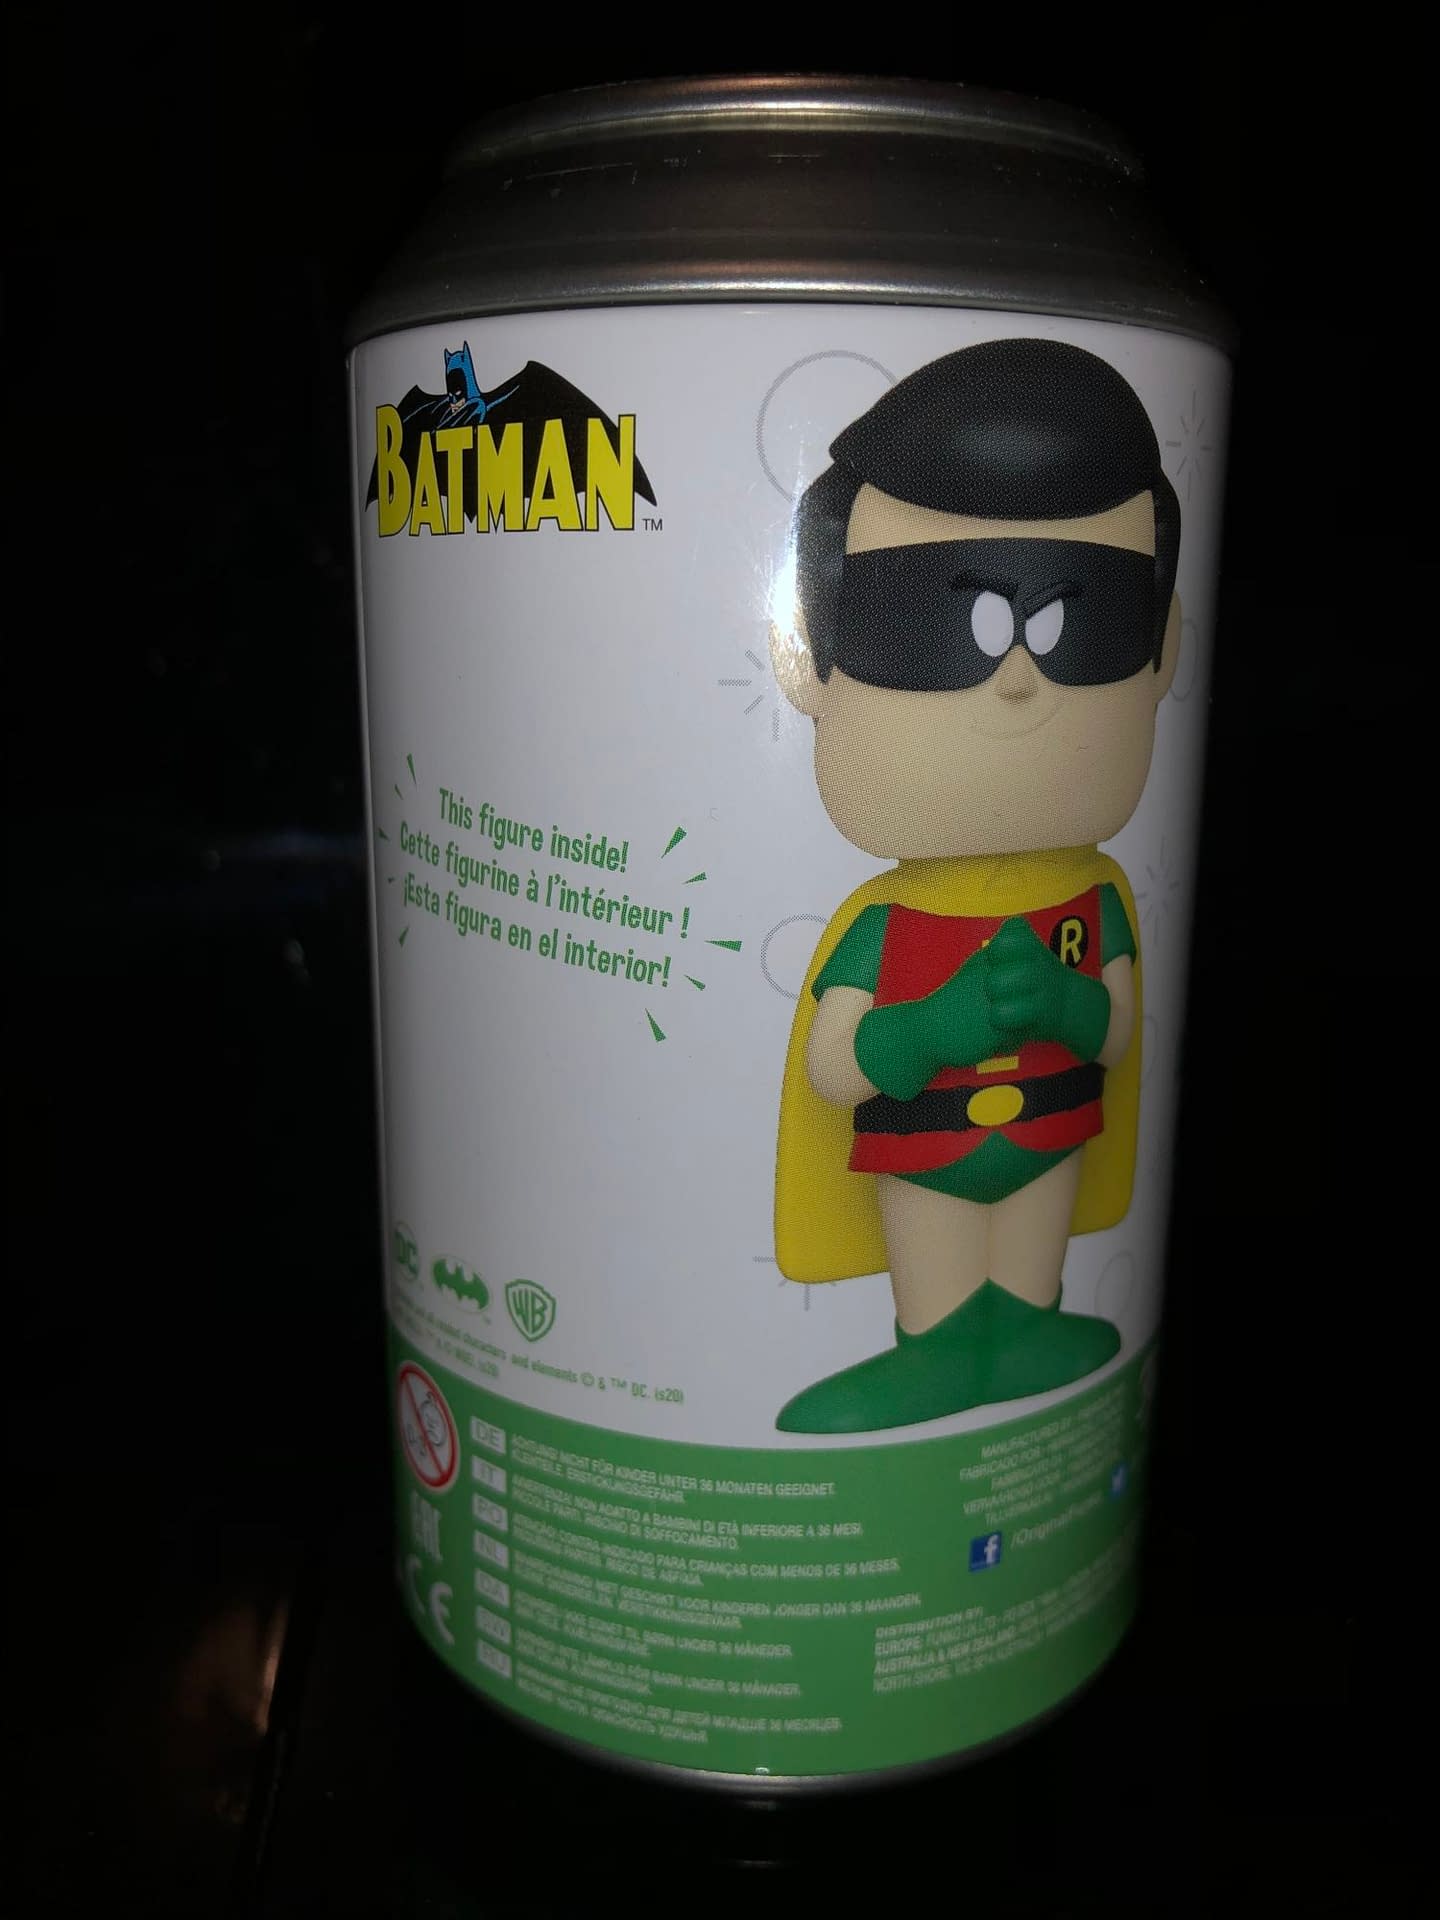 Funko Soda: The Hunt for the Chase - Robin Edition